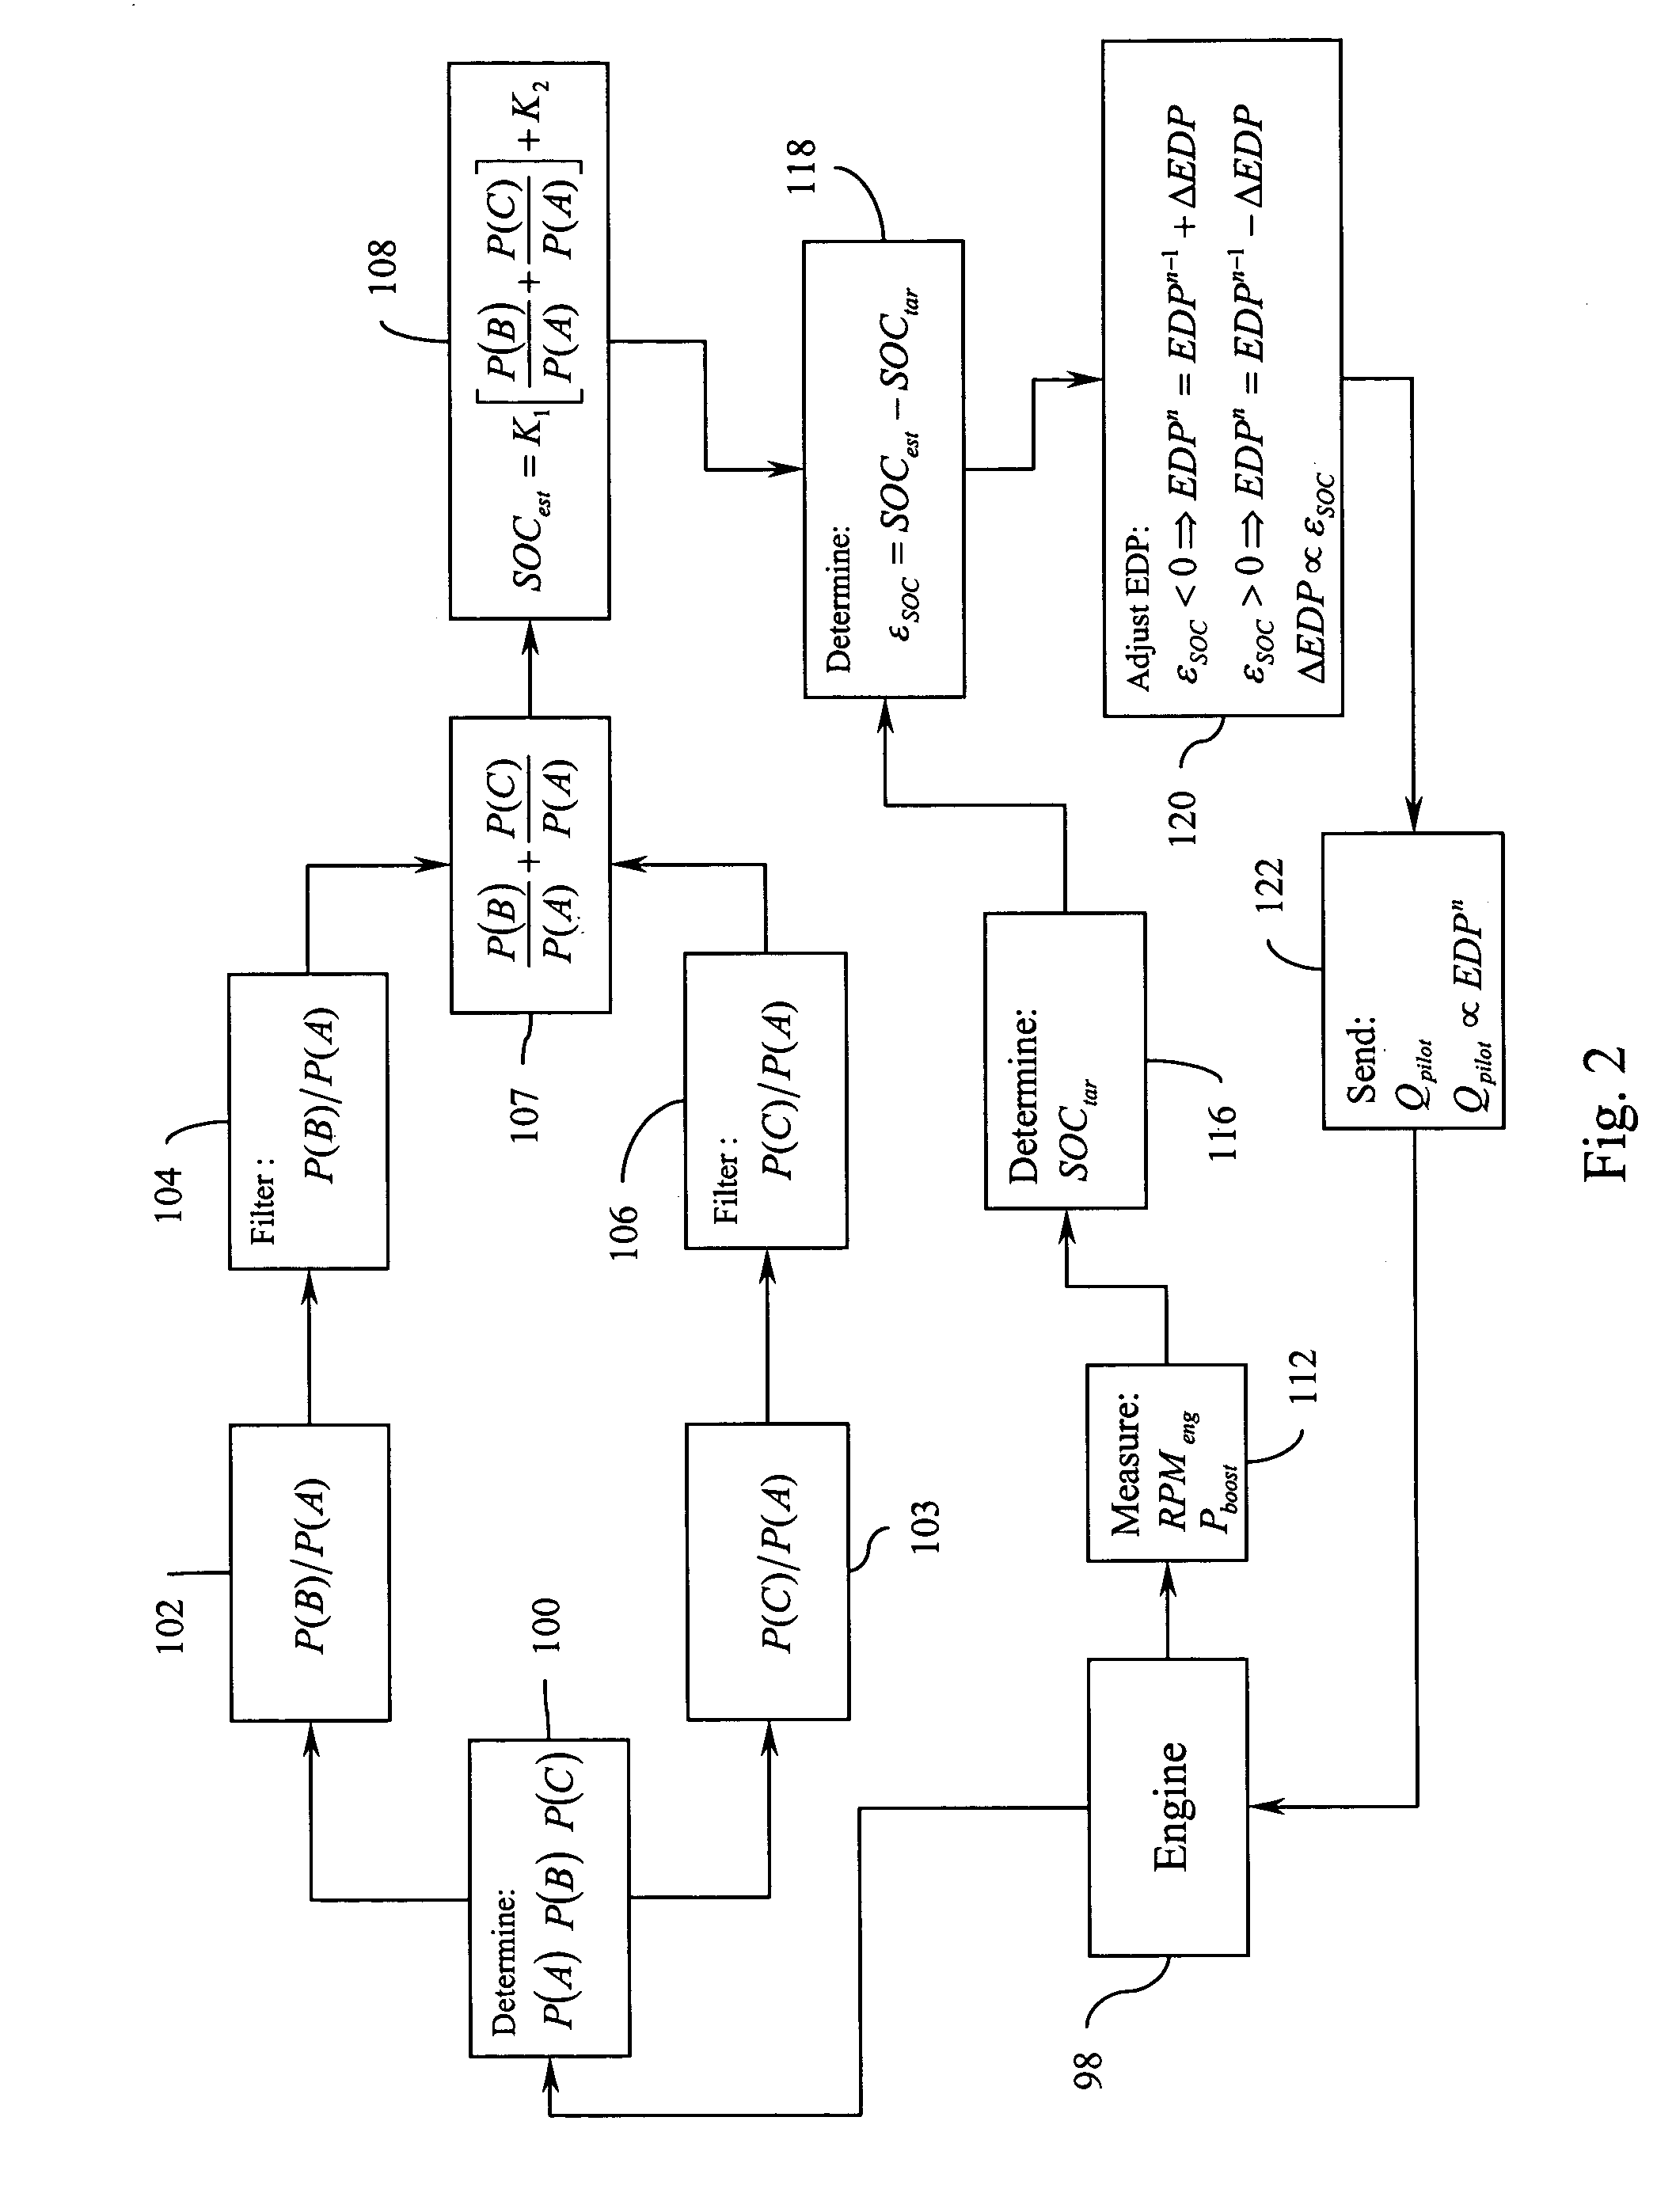 Method and apparatus for controlling an internal combustion engine using combustion chamber pressure sensing